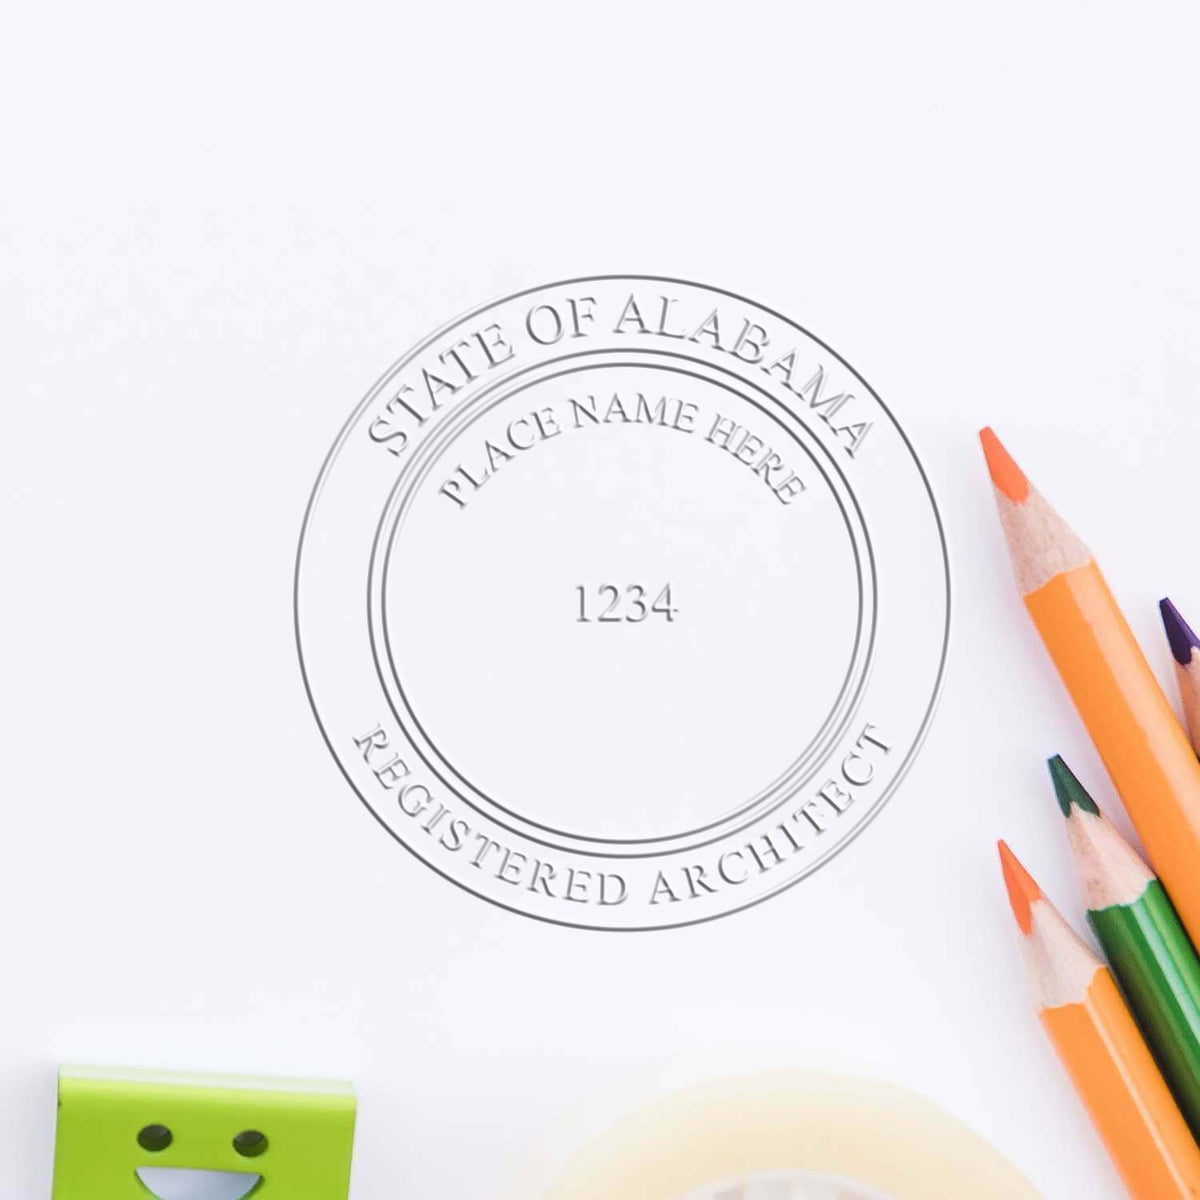 This paper is stamped with a sample imprint of the Extended Long Reach Alabama Architect Seal Embosser, signifying its quality and reliability.